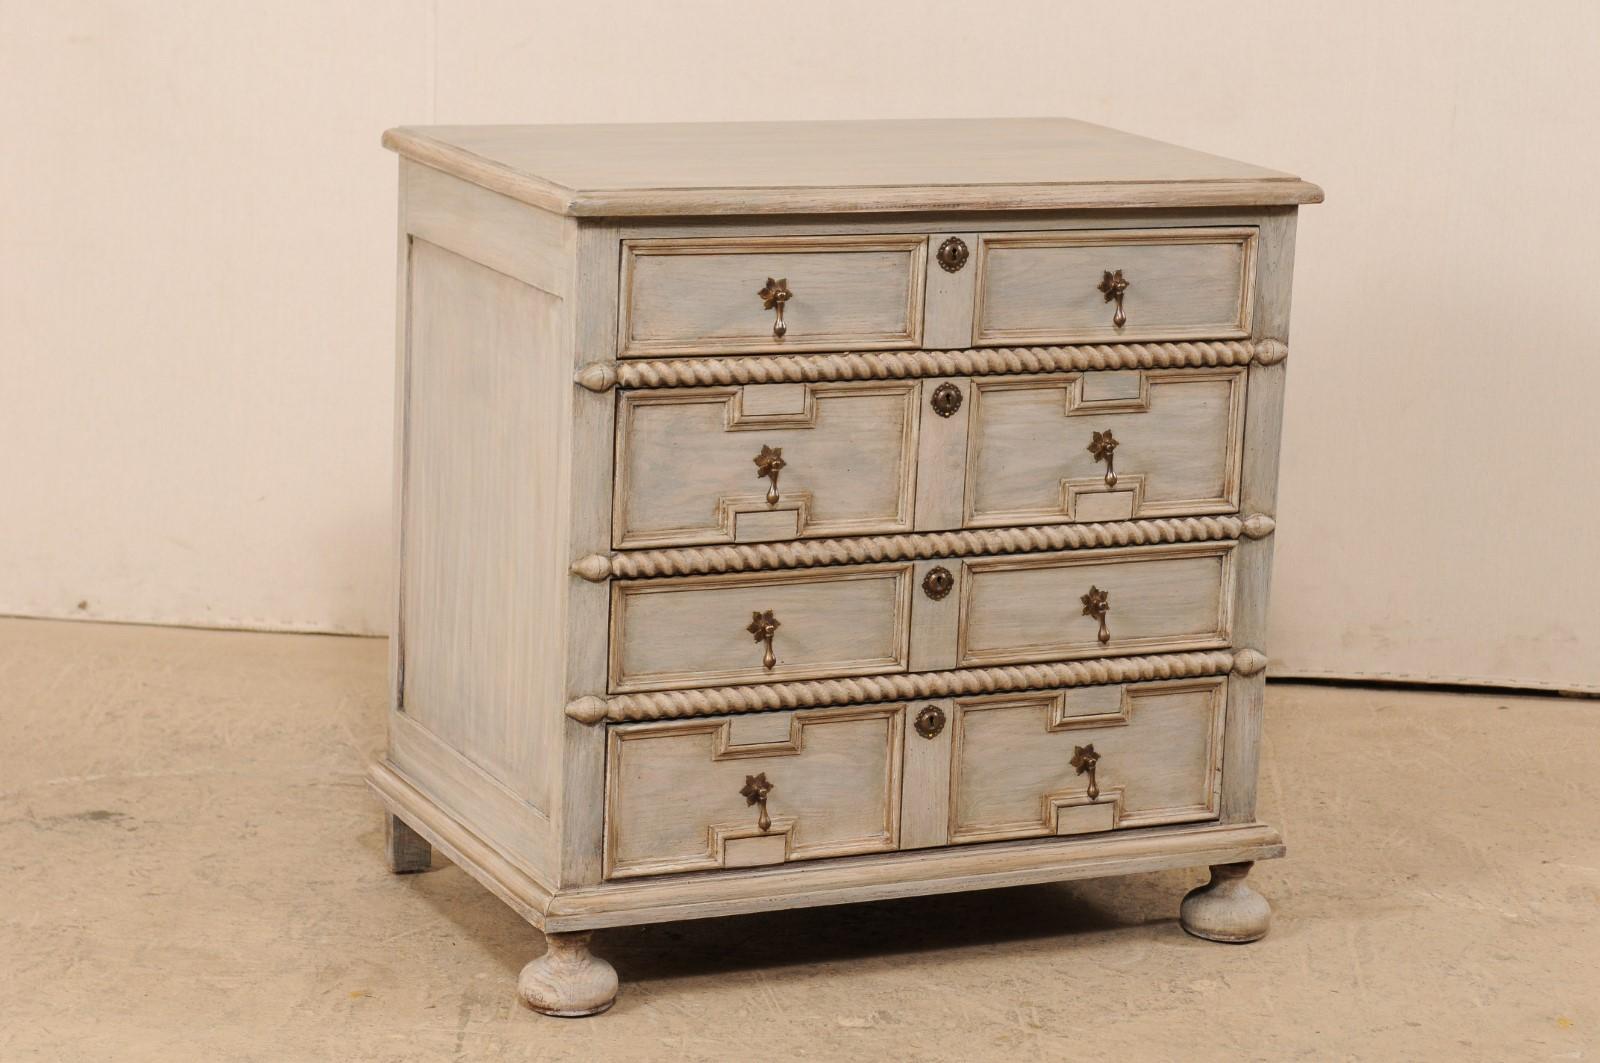 A mid-20th century carved and painted wood chest of drawers from American furniture makers Banks, Coldstone Co. (Deep River, High Point, NC). This vintage chest houses four drawers, with second and fourth drawers beautifully carved with a pair of